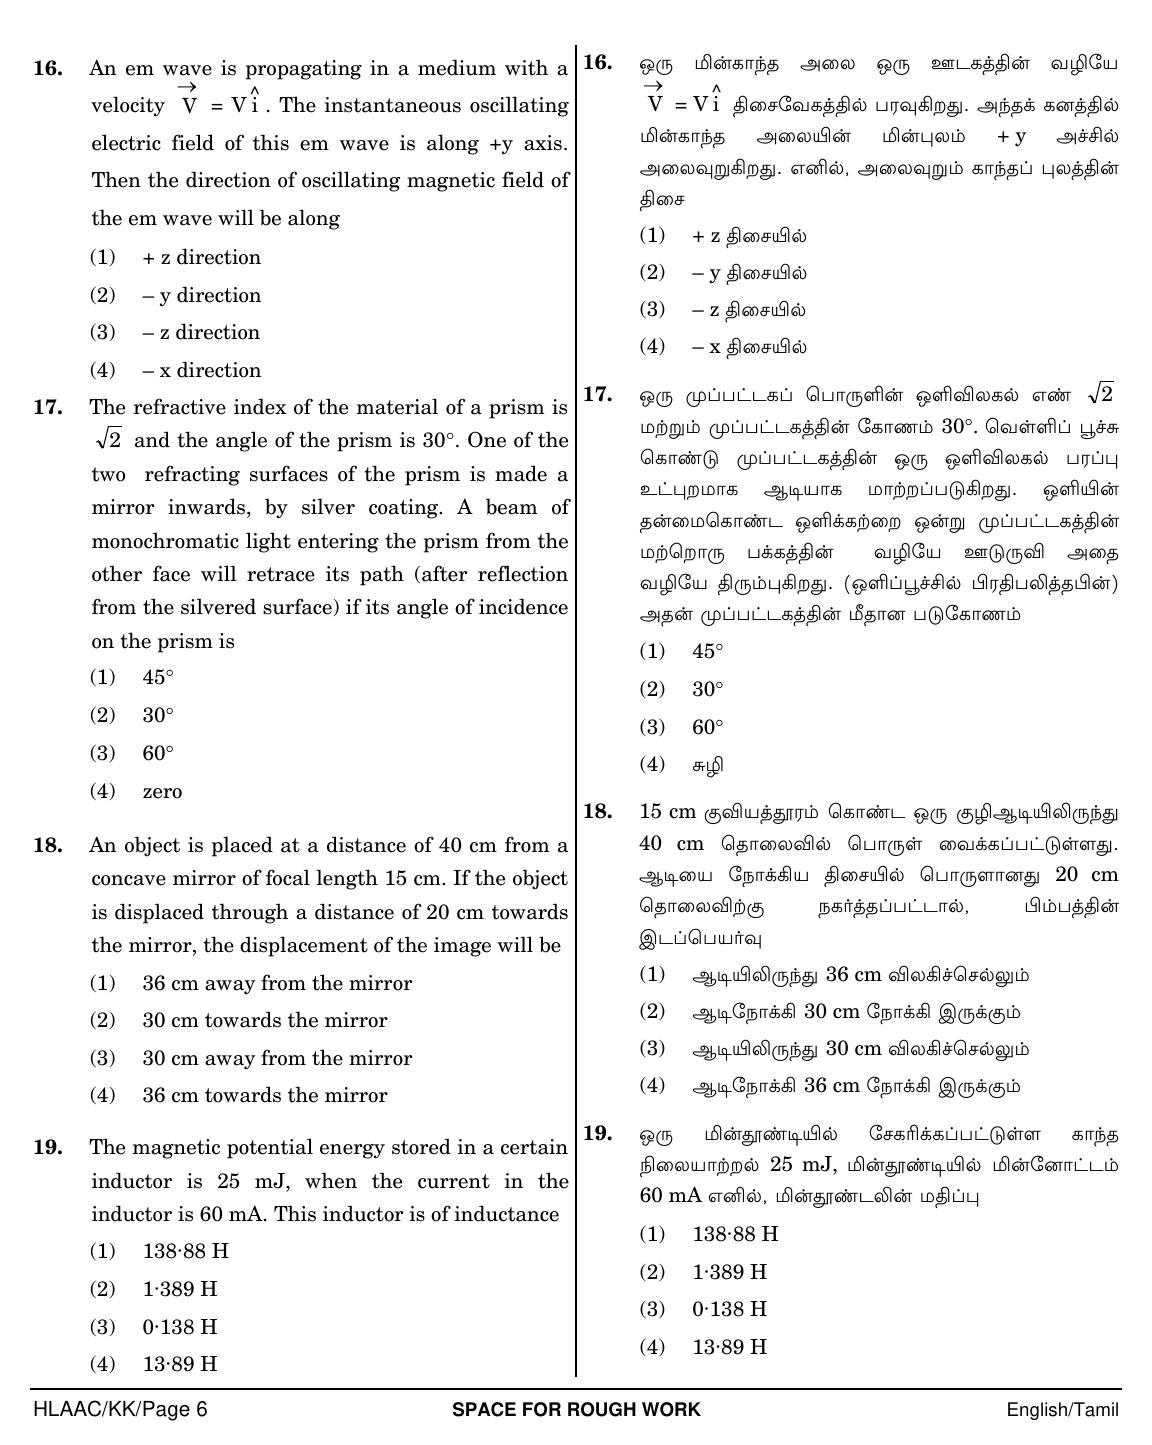 NEET Tamil KK 2018 Question Paper - Page 6